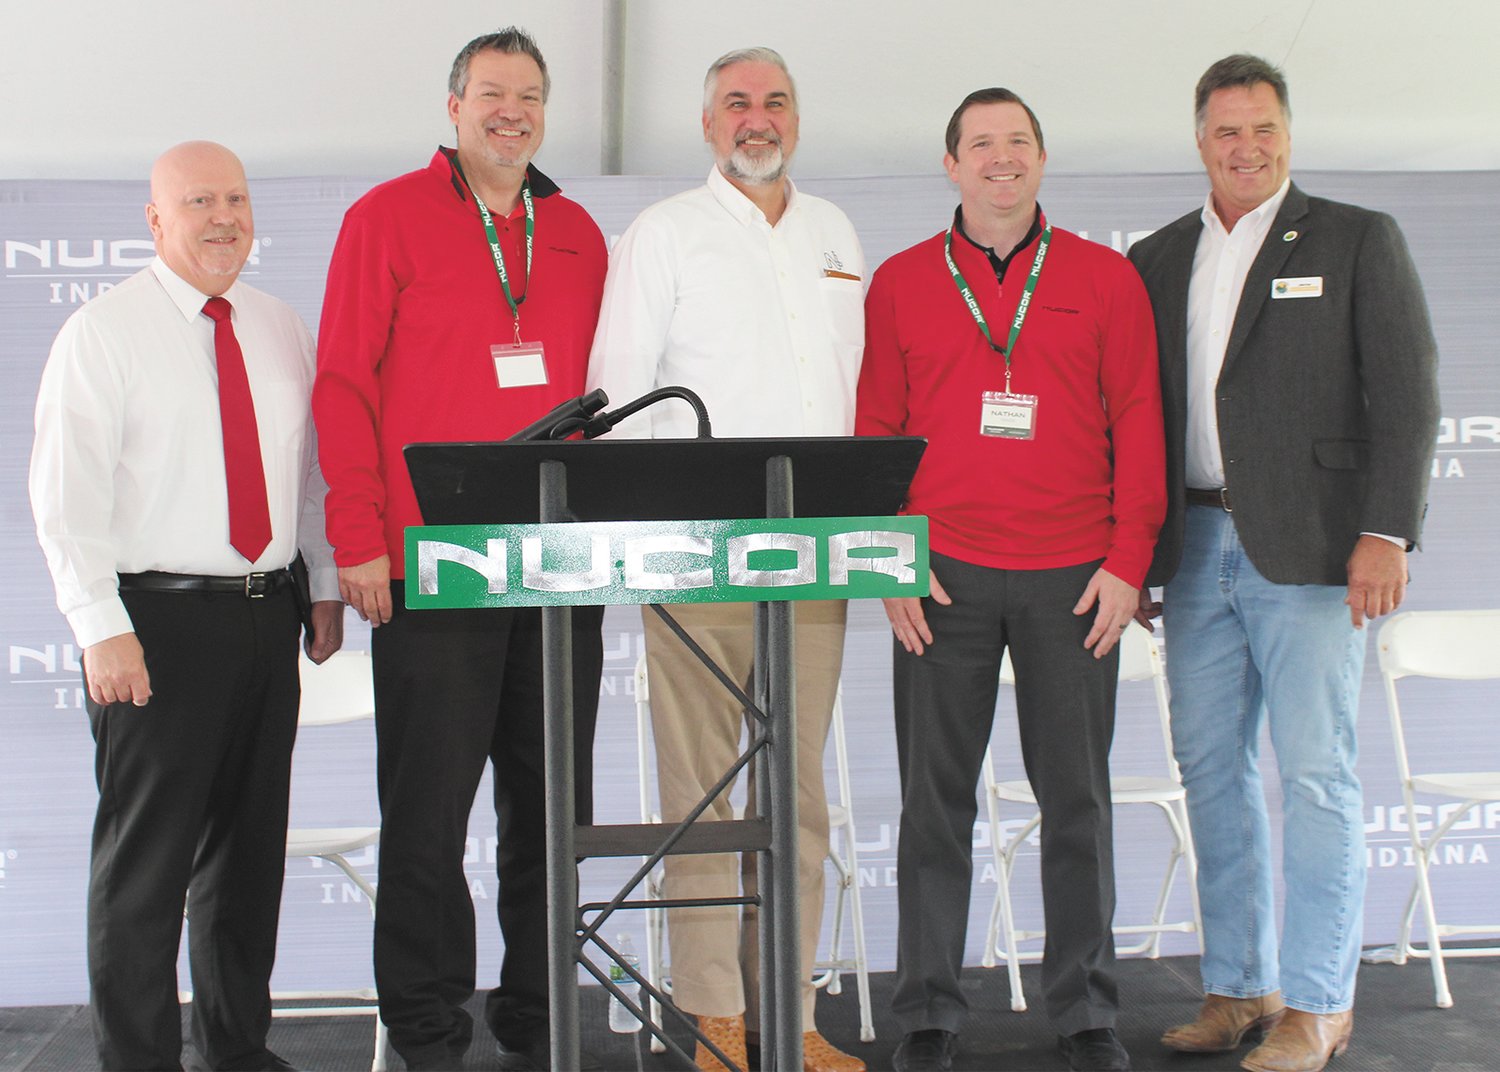 Pictured, from left, are Crawfordsville Mayor Todd Barton; Dan Needham, Nucor Executive Vice President for Commercial; Indiana Gov. Eric Holcomb; Nathan Fraser, Nucor Vice President and General Manager; and Montgomery County Commissioner John Frey.